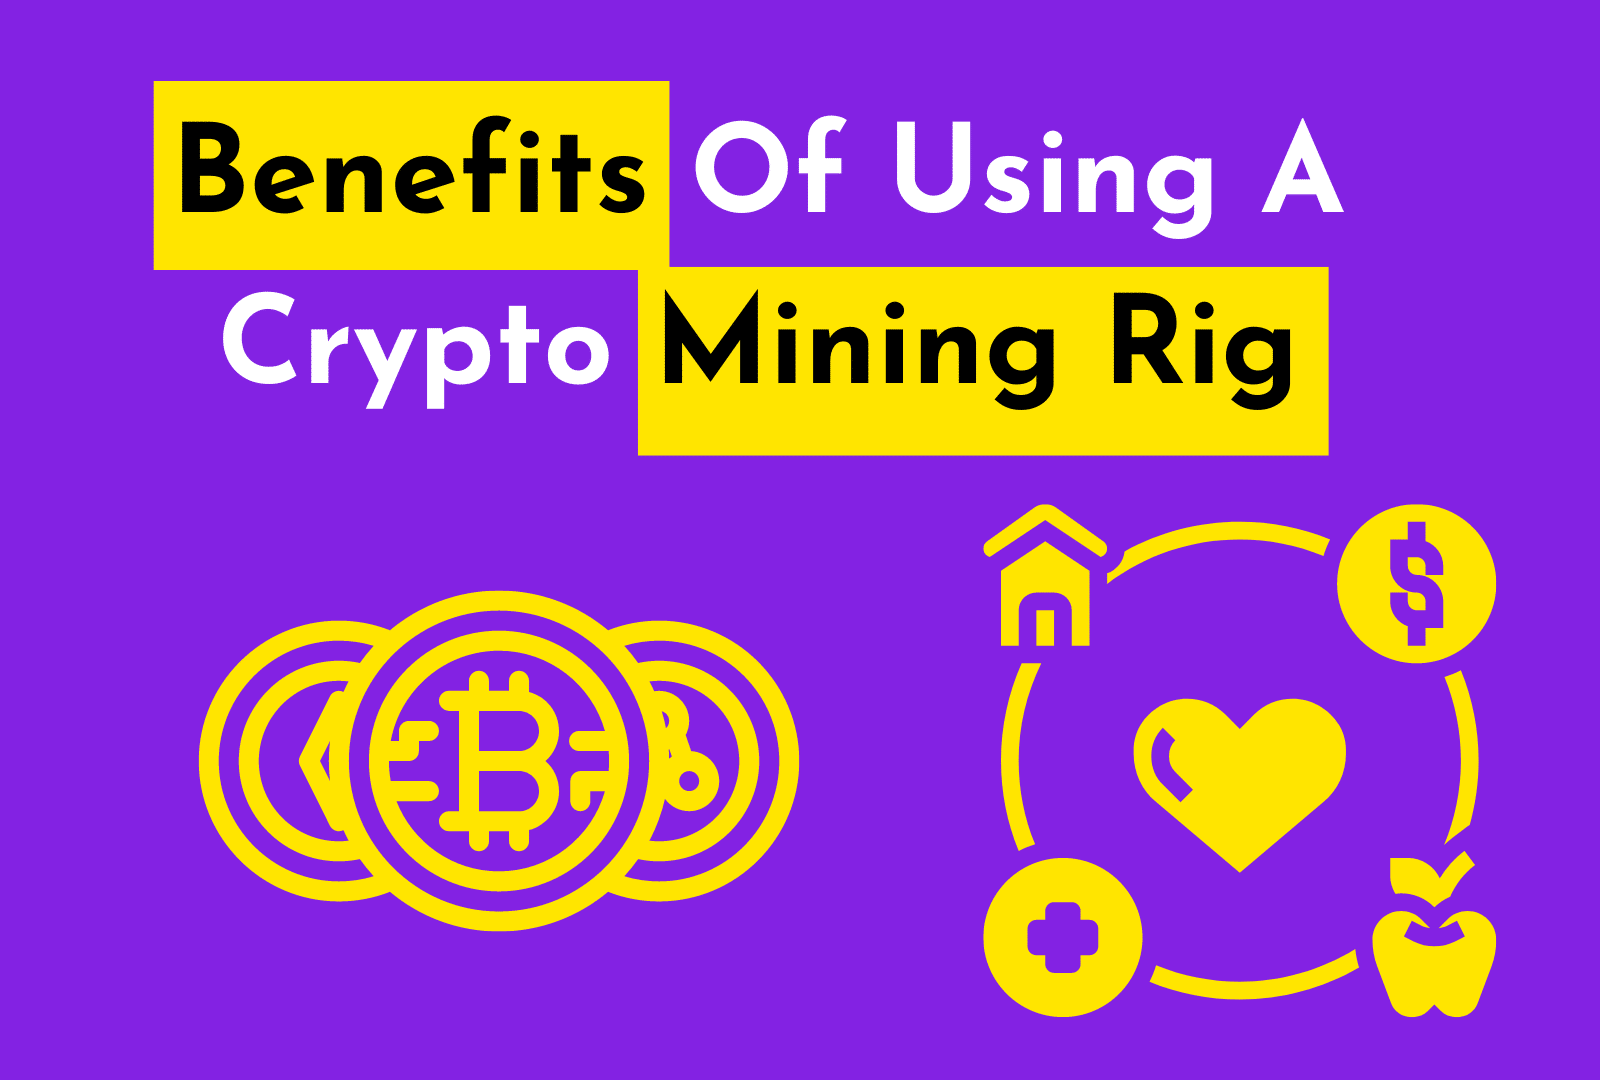 C:\Users\lenovo\Downloads\What Are The Benefits Of Using A Cryptocurrency Mining Rig.png